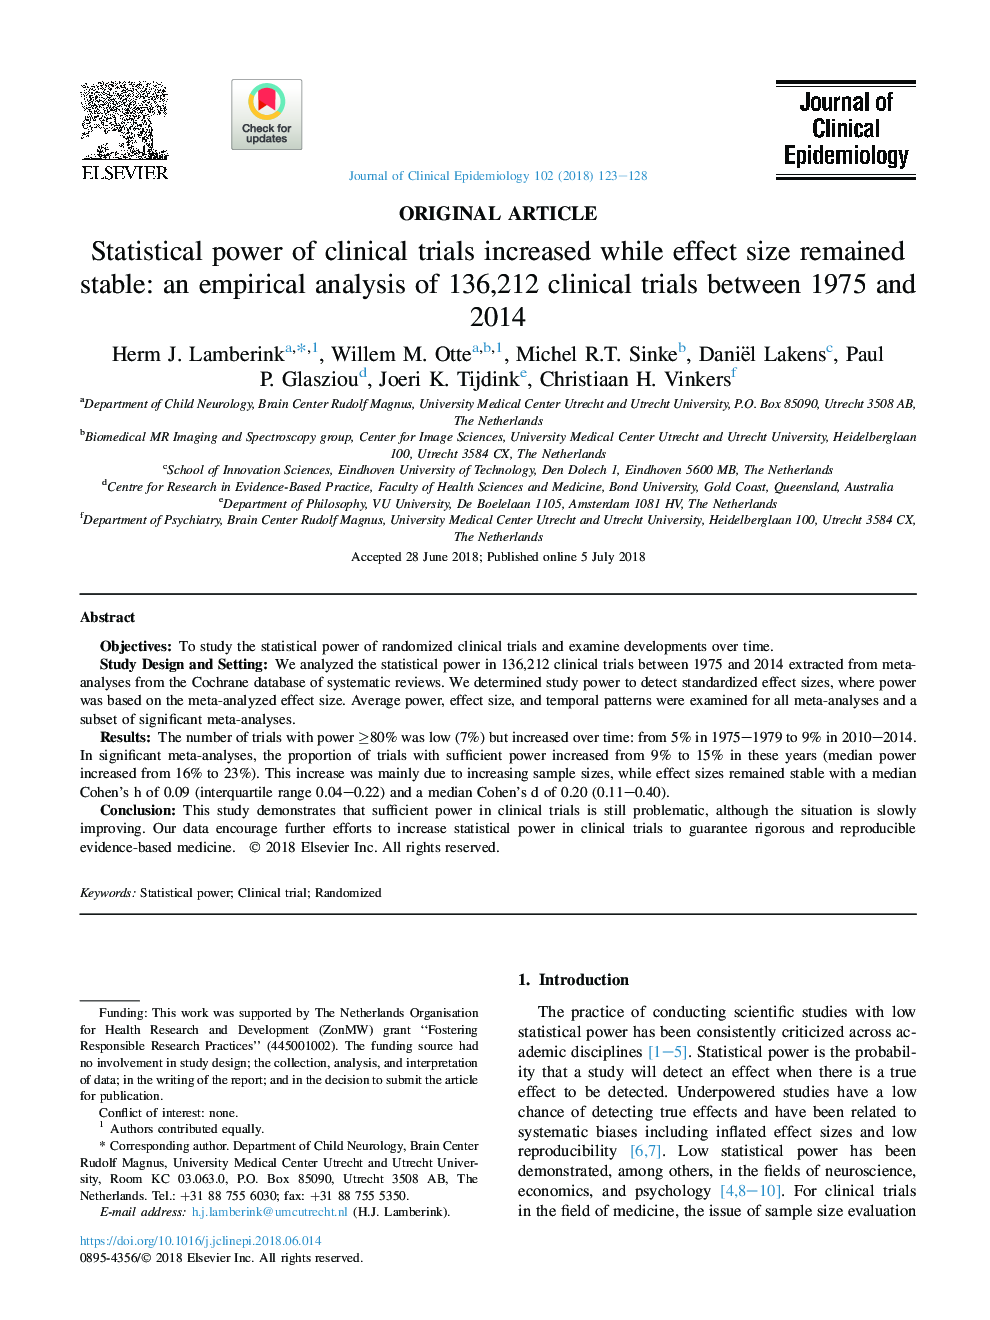 Statistical power of clinical trials increased while effect size remained stable: an empirical analysis of 136,212 clinical trials between 1975 and 2014